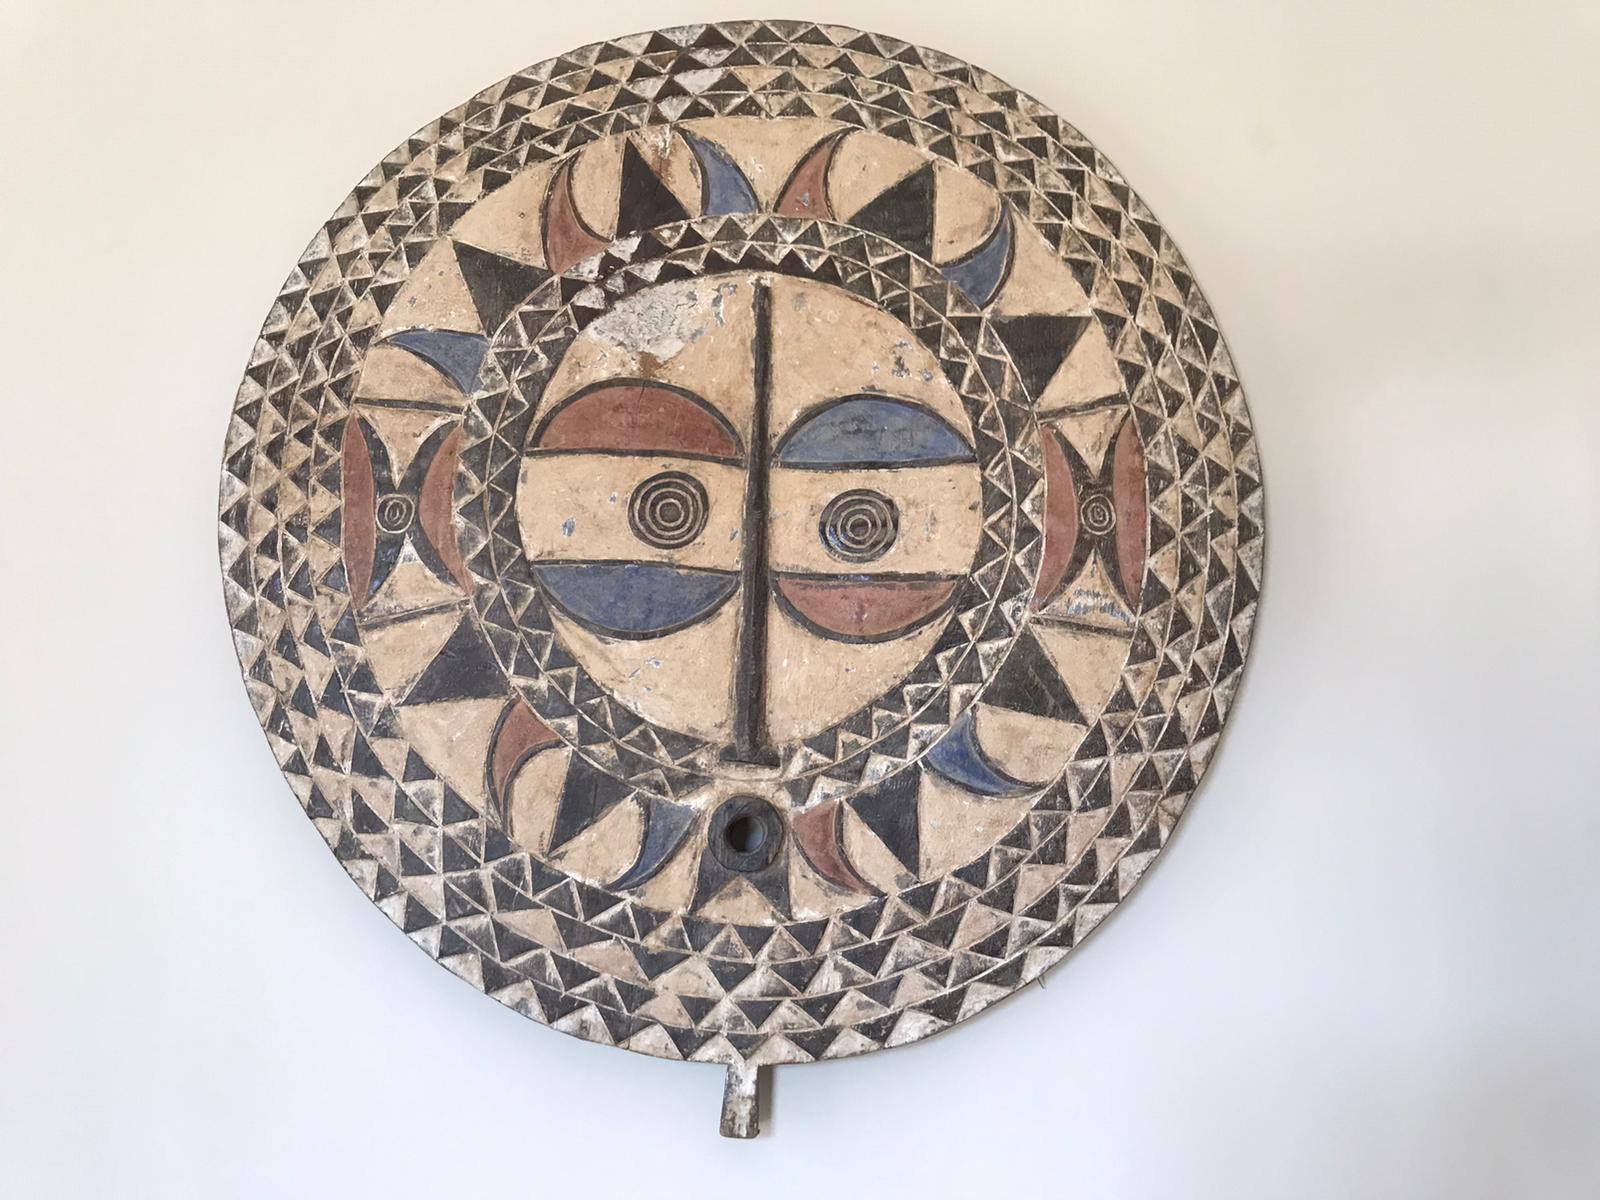 Hand painted wood mask. The geometric designs of each mask also carry various meanings. The light and dark pattern also symbolizes good from evil and female from male.